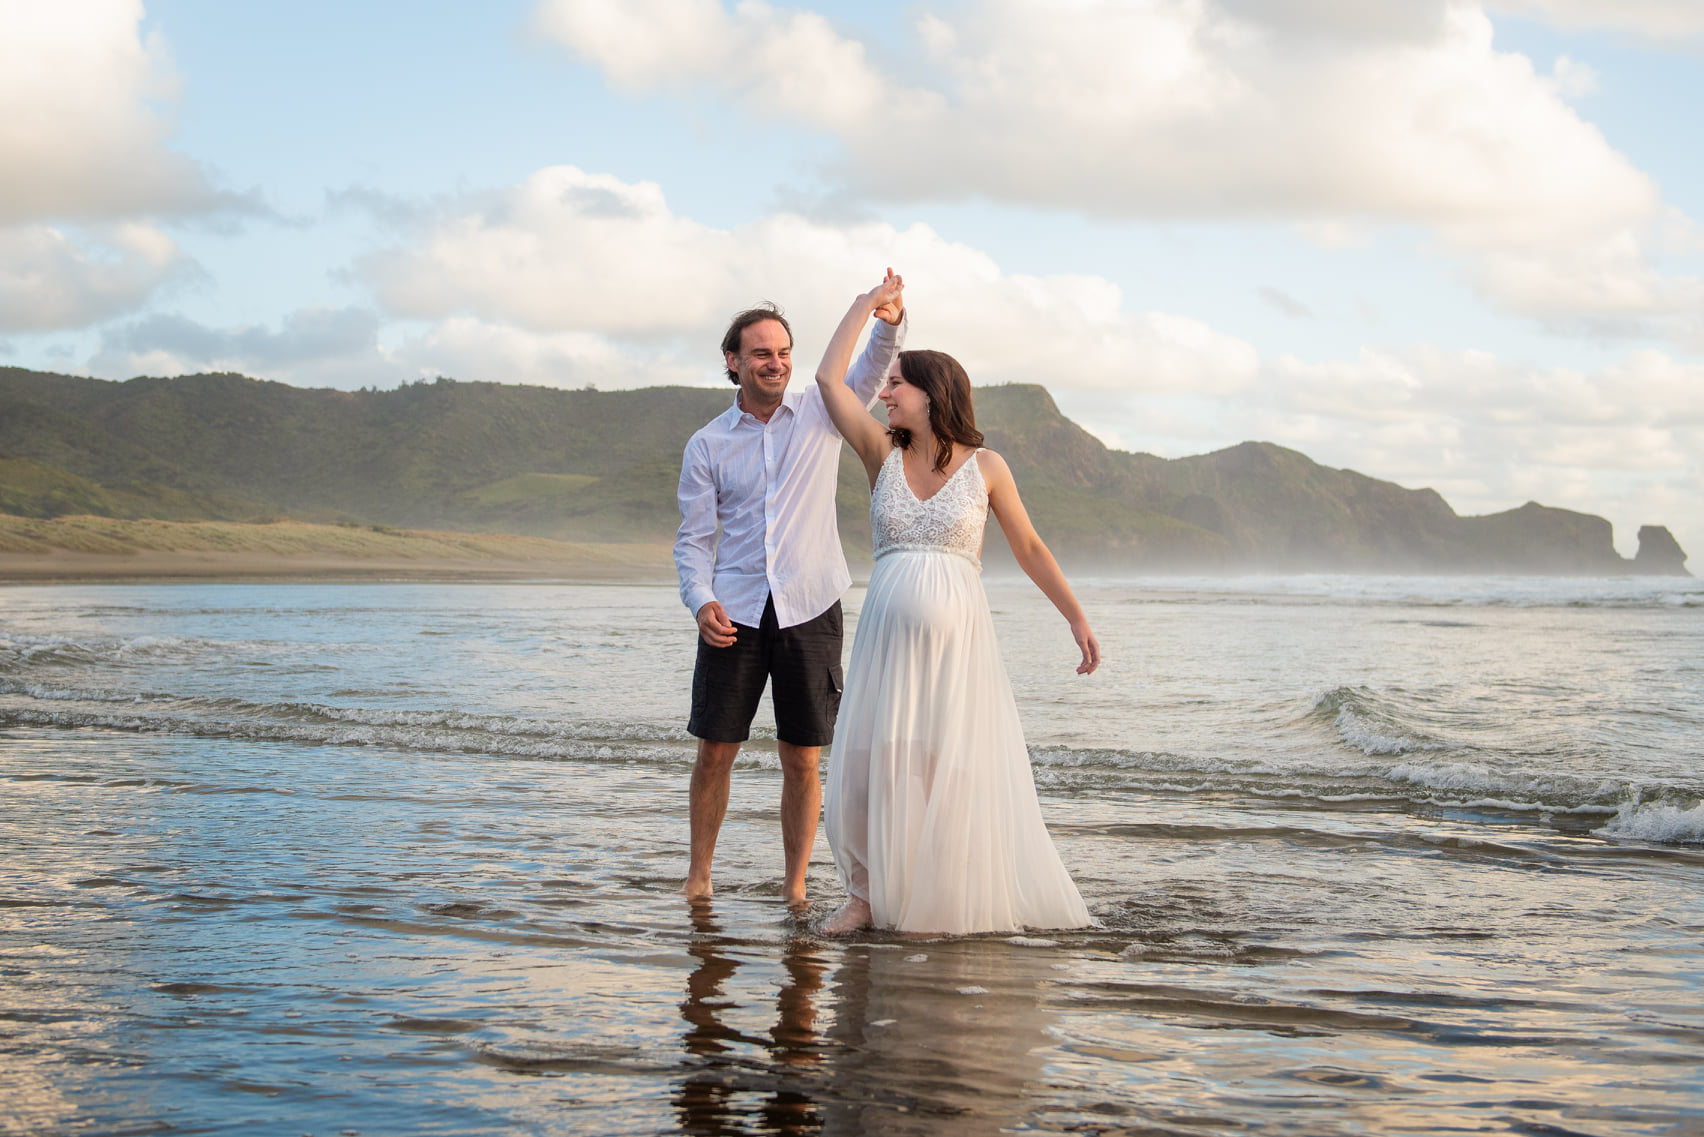 maternity photography at beach by auckland photographer siobhan kelly photography